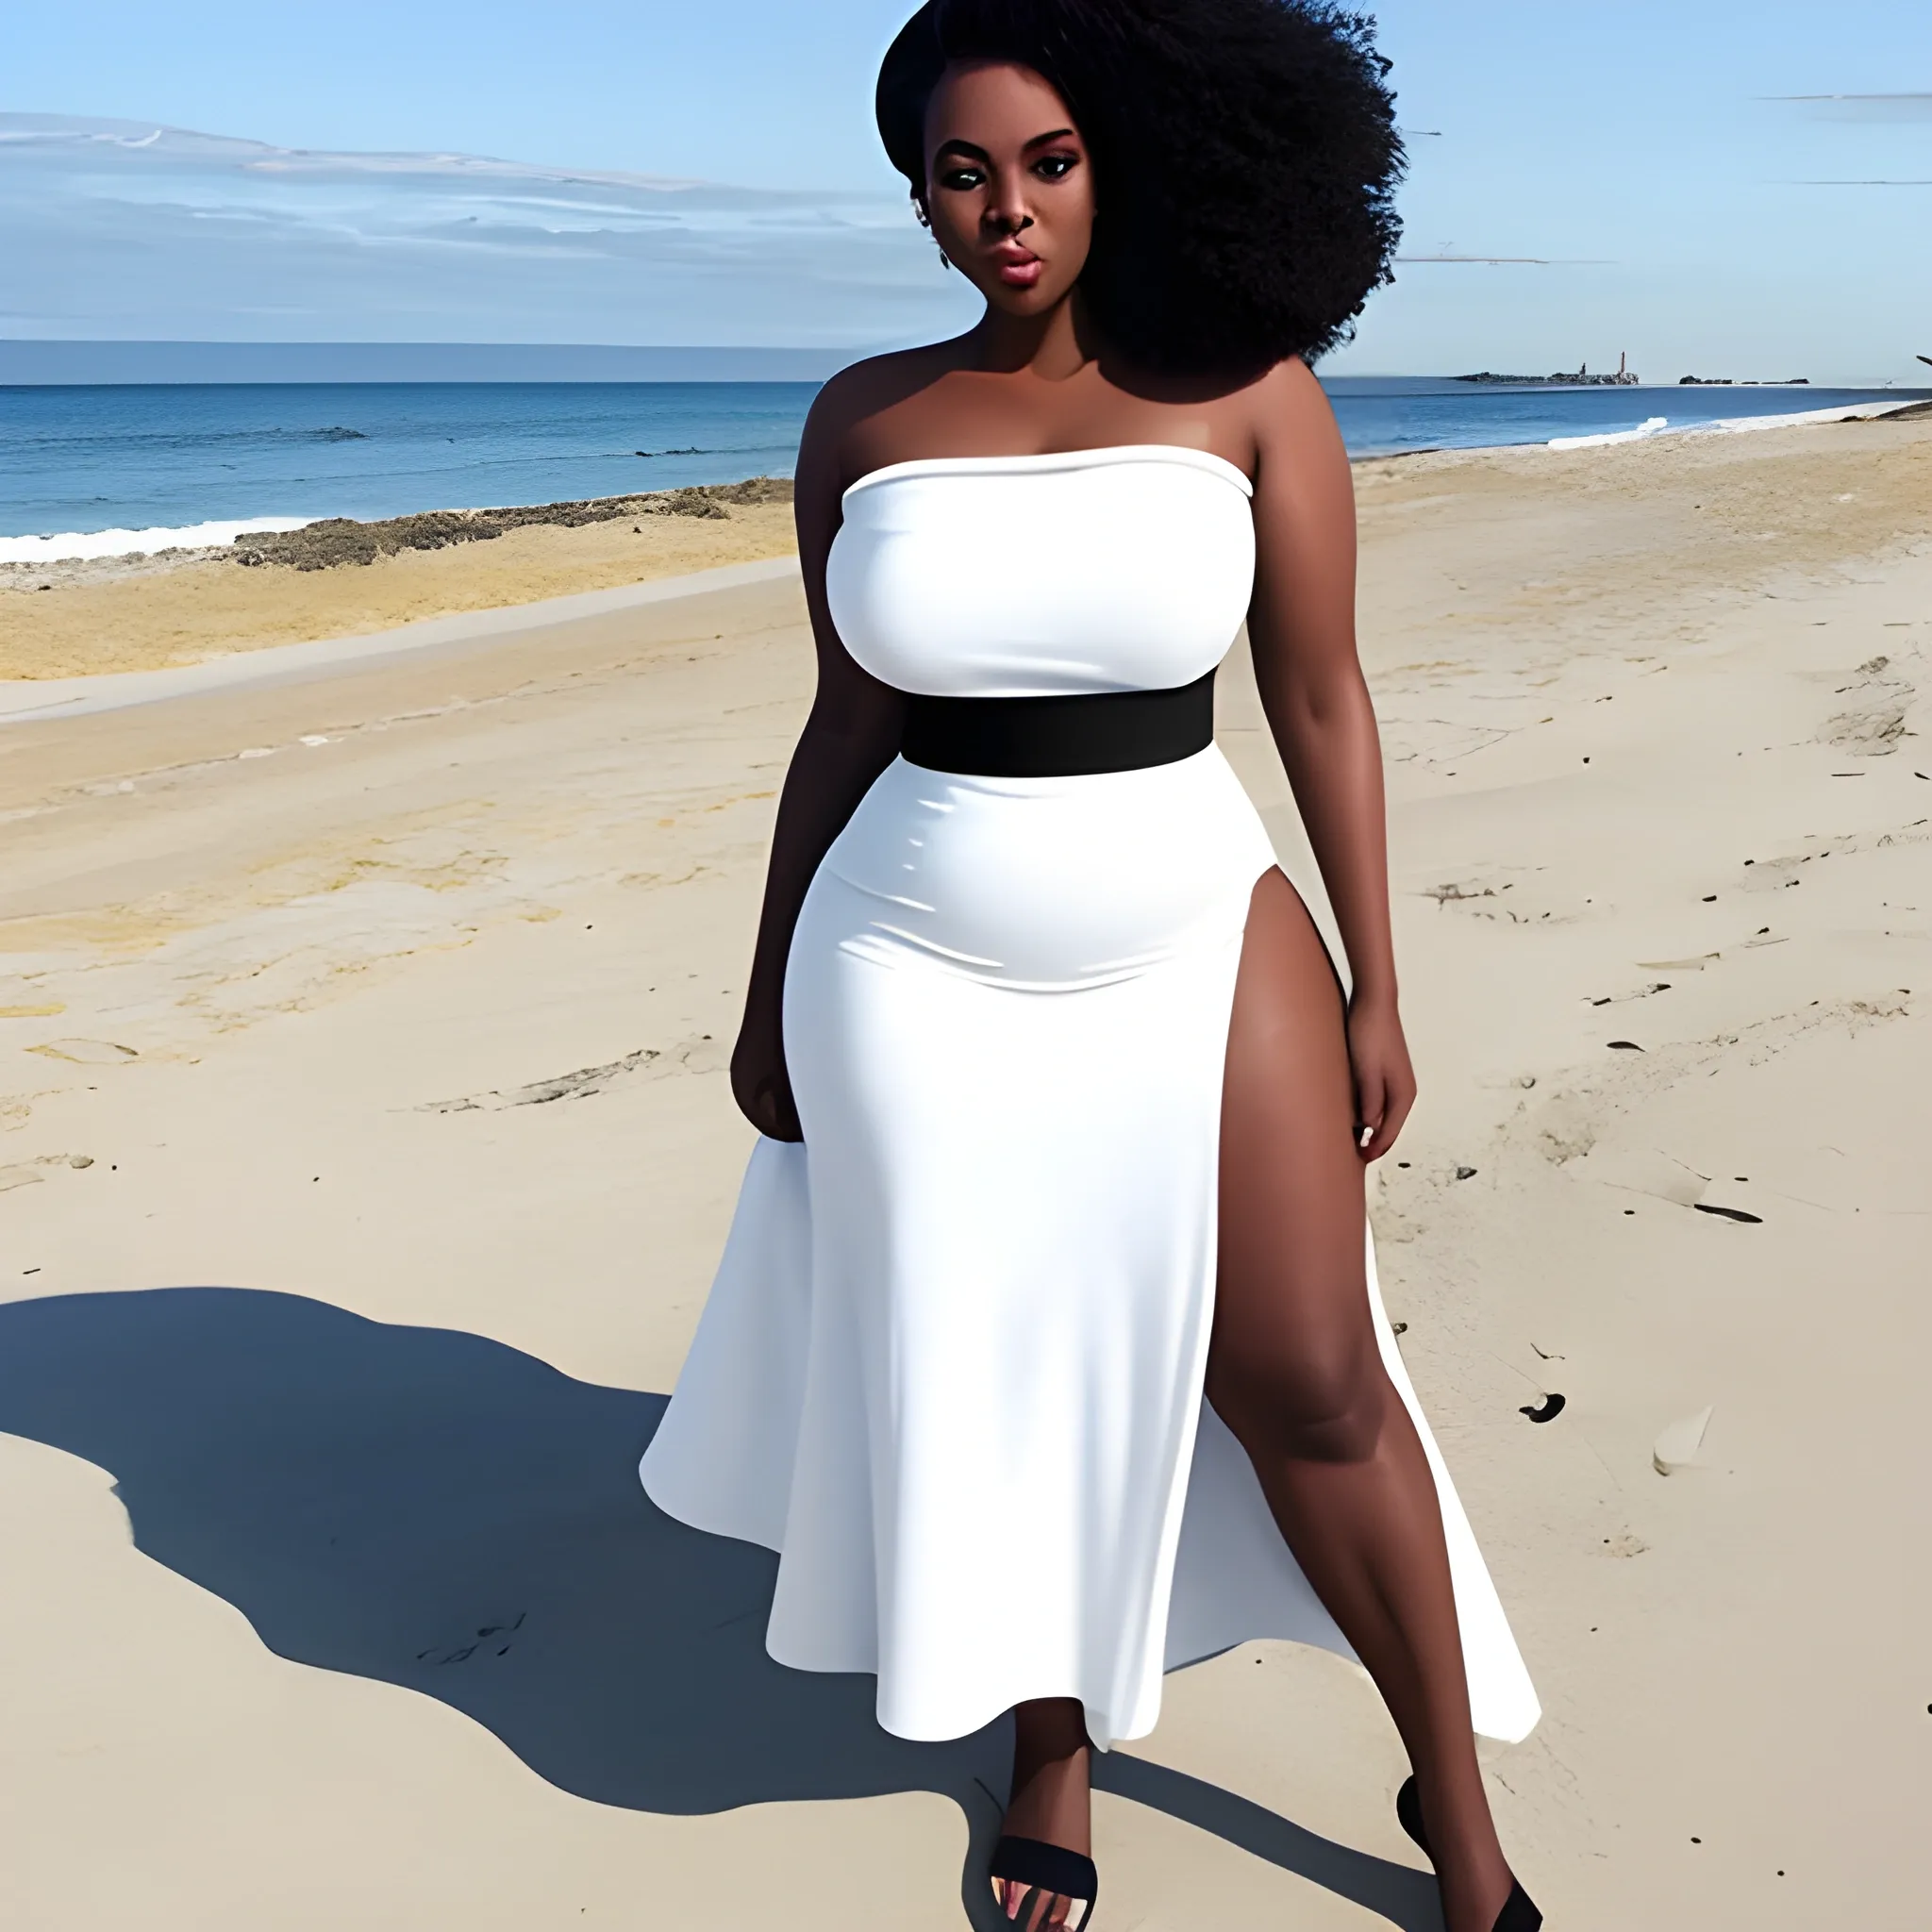 Black+tall+curvy women+wearing white dress+ standing at the beac